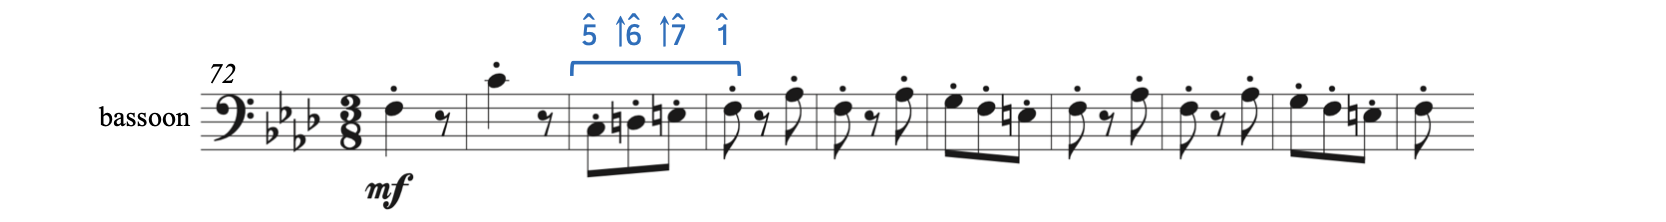 Ascending melodic minor scale in Dukas's The Sorcerer's Apprentice. The raised submediant and raised leading tone from the ascending melodic minor scale are used in the bassoon melody in F minor.